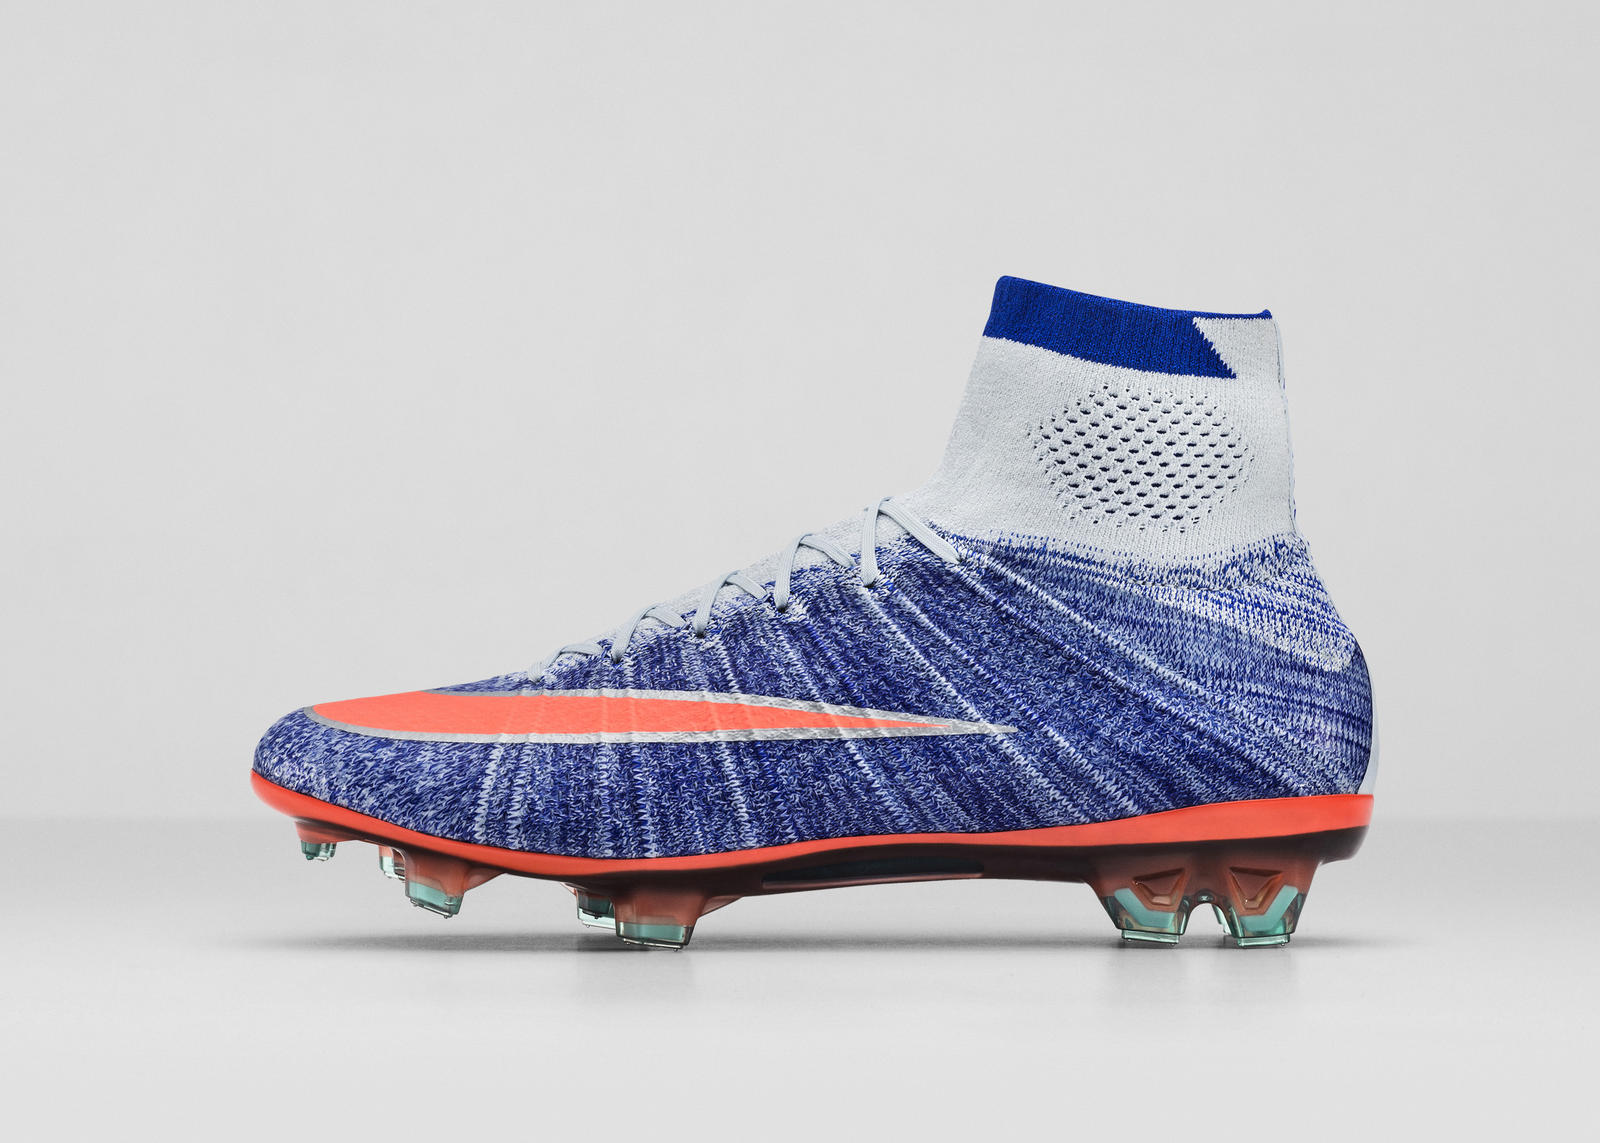 Nike soccer cleats share image LZYHTLR